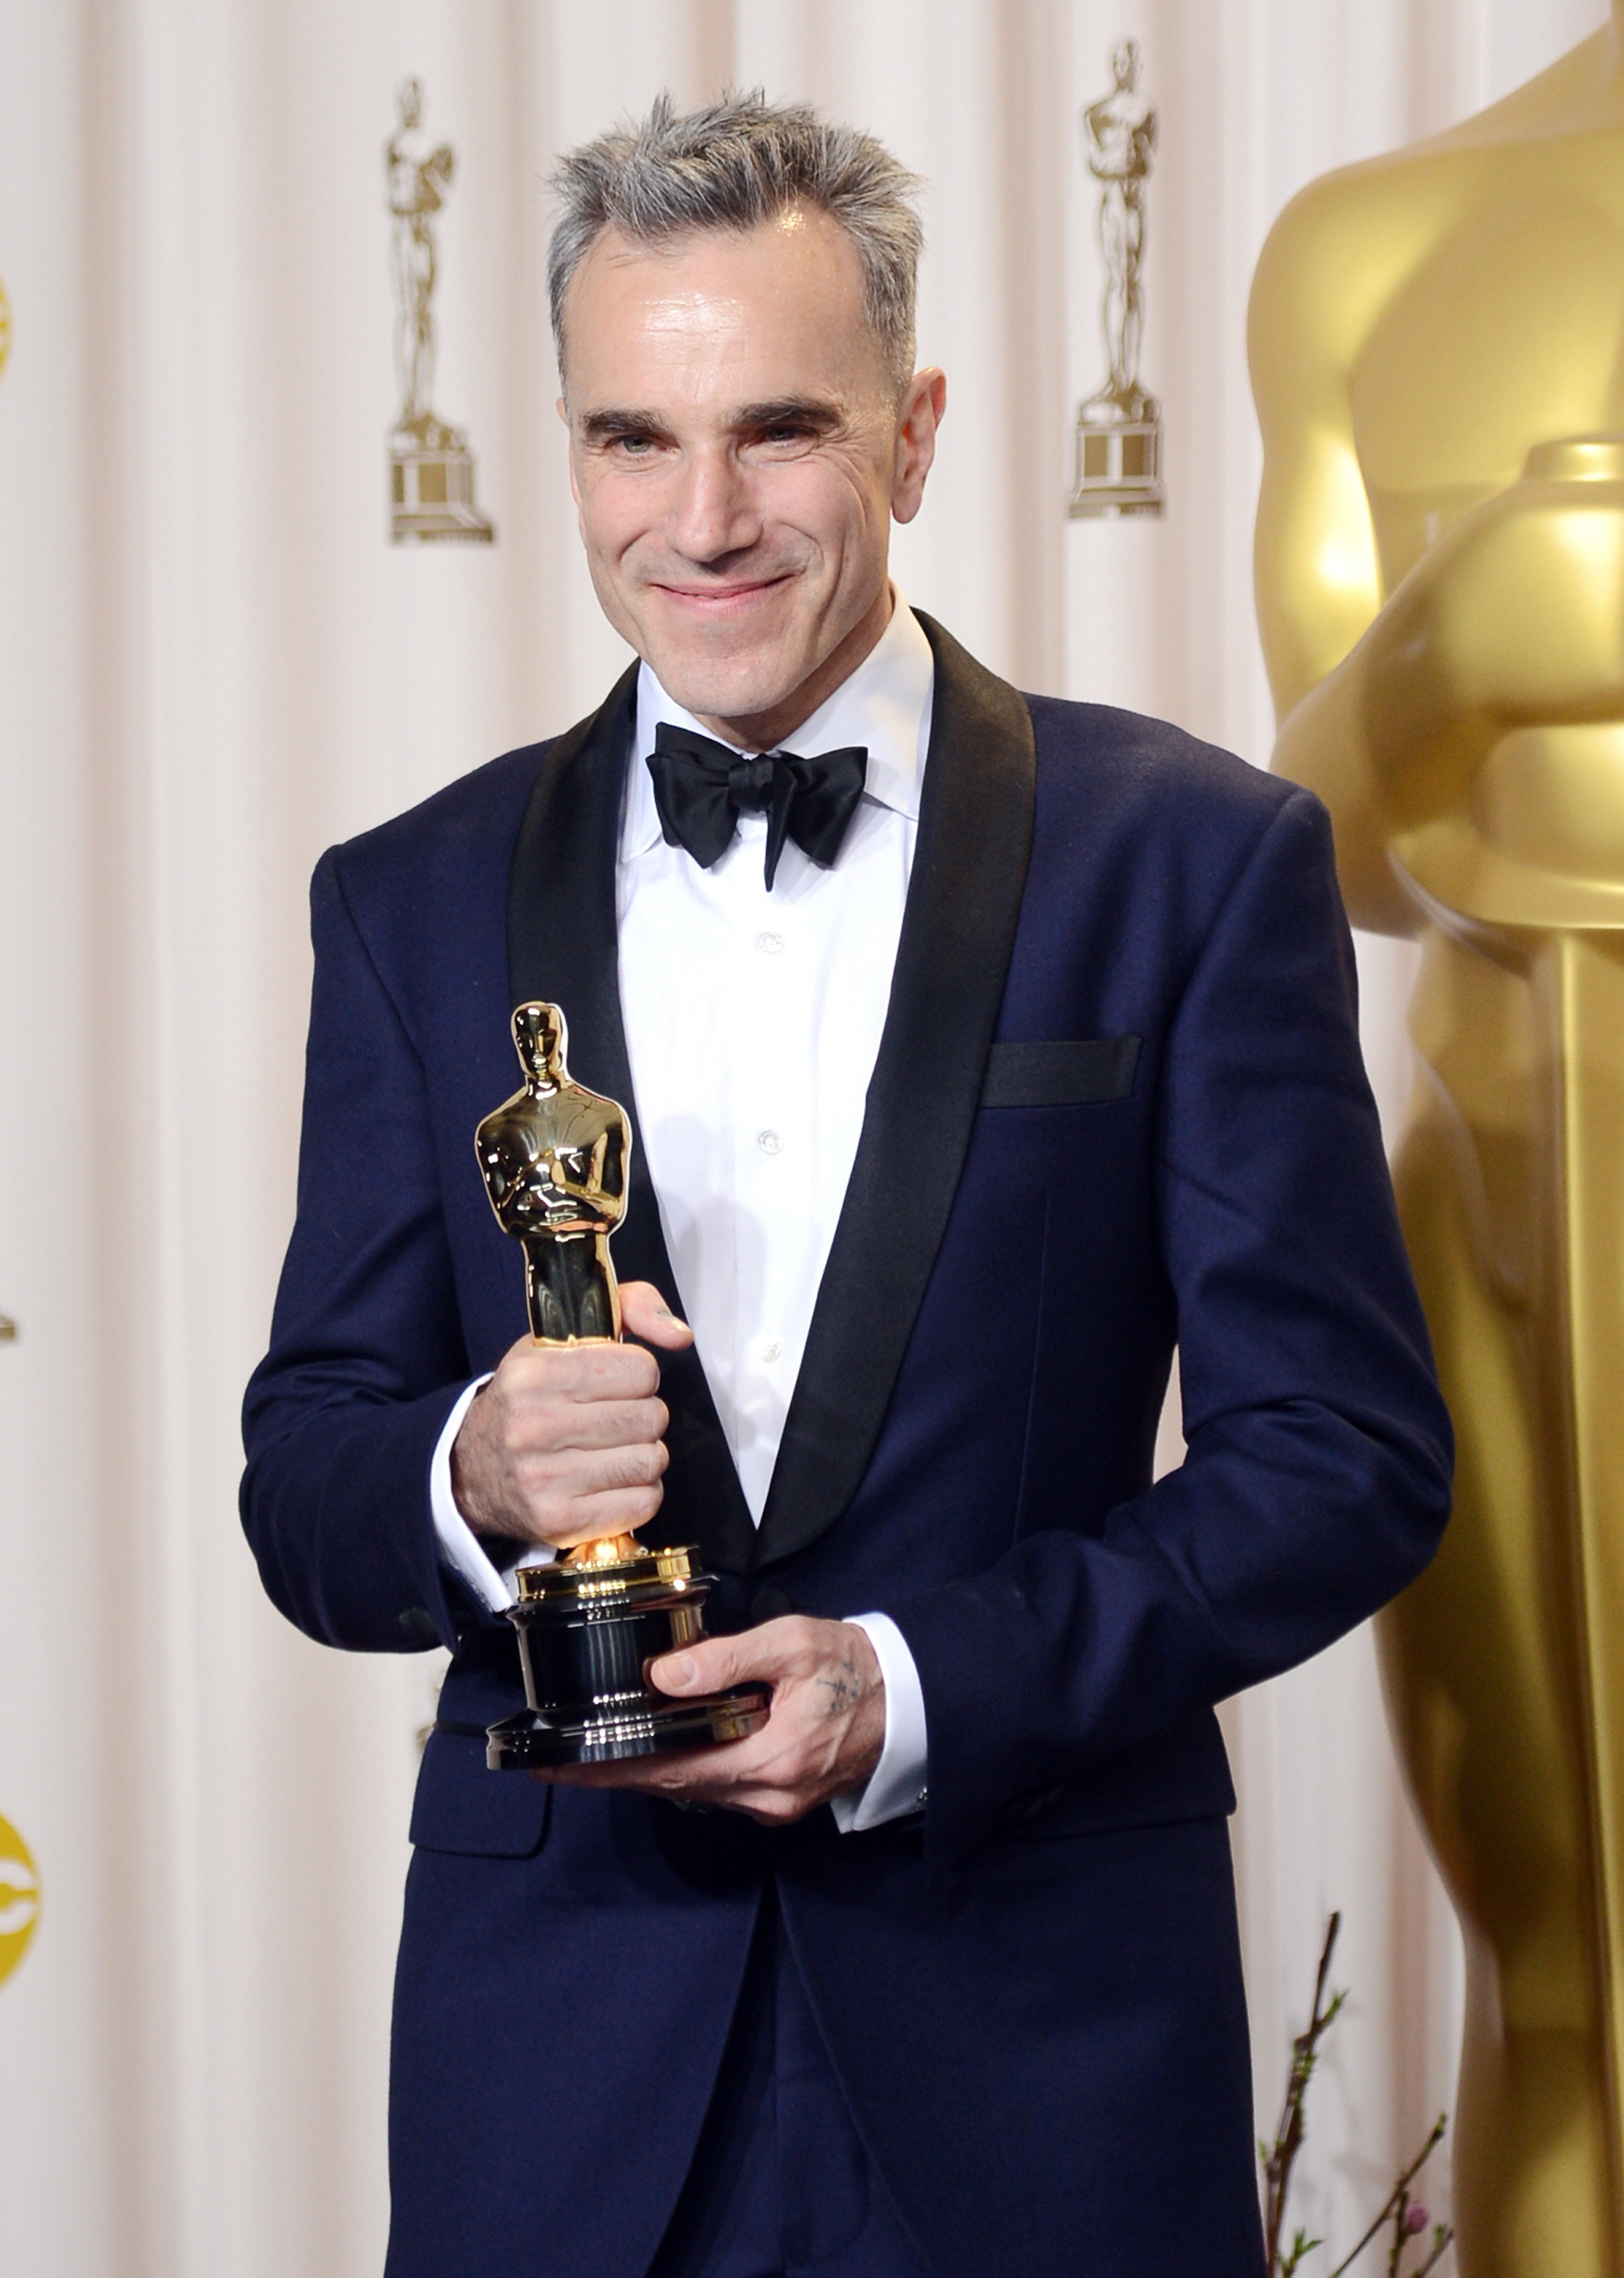 Smiling Daniel wearing a suit and bow tie and holding an Oscar